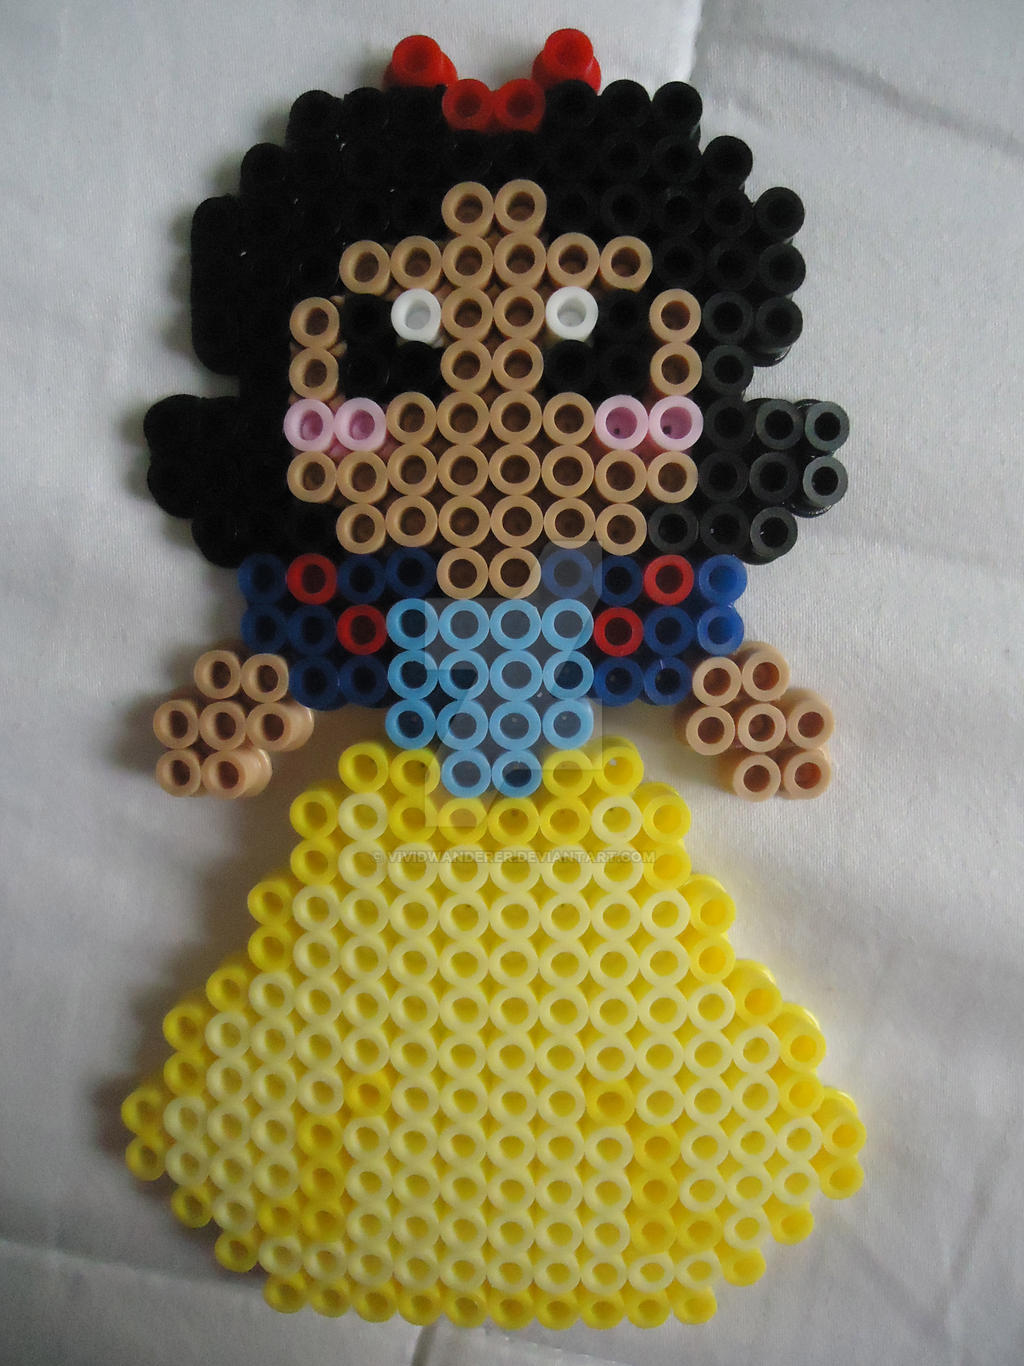 Let's work on DIY Princess Snow White with beads.